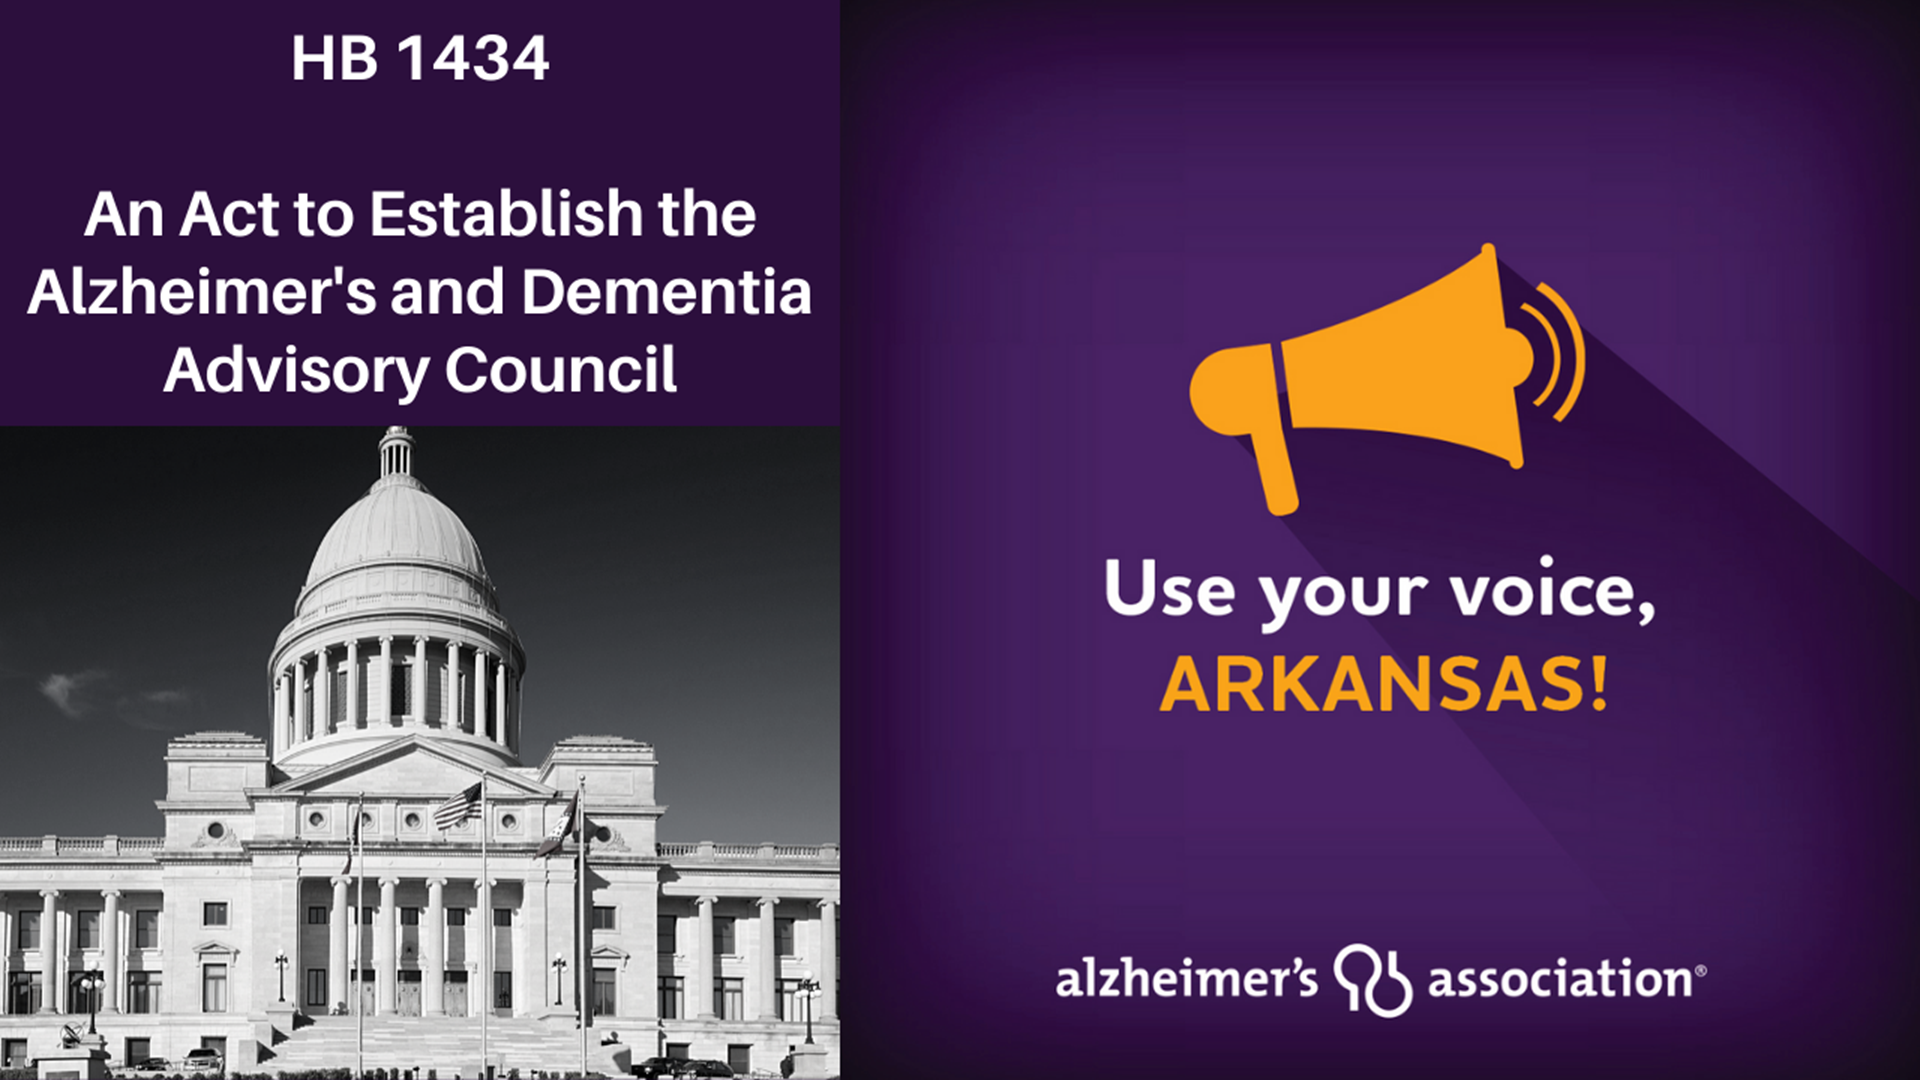 House Bill 1434 would create an Advisory Council to help prioritize and coordinate Arkansas’s response to Alzheimer’s and Dementia.